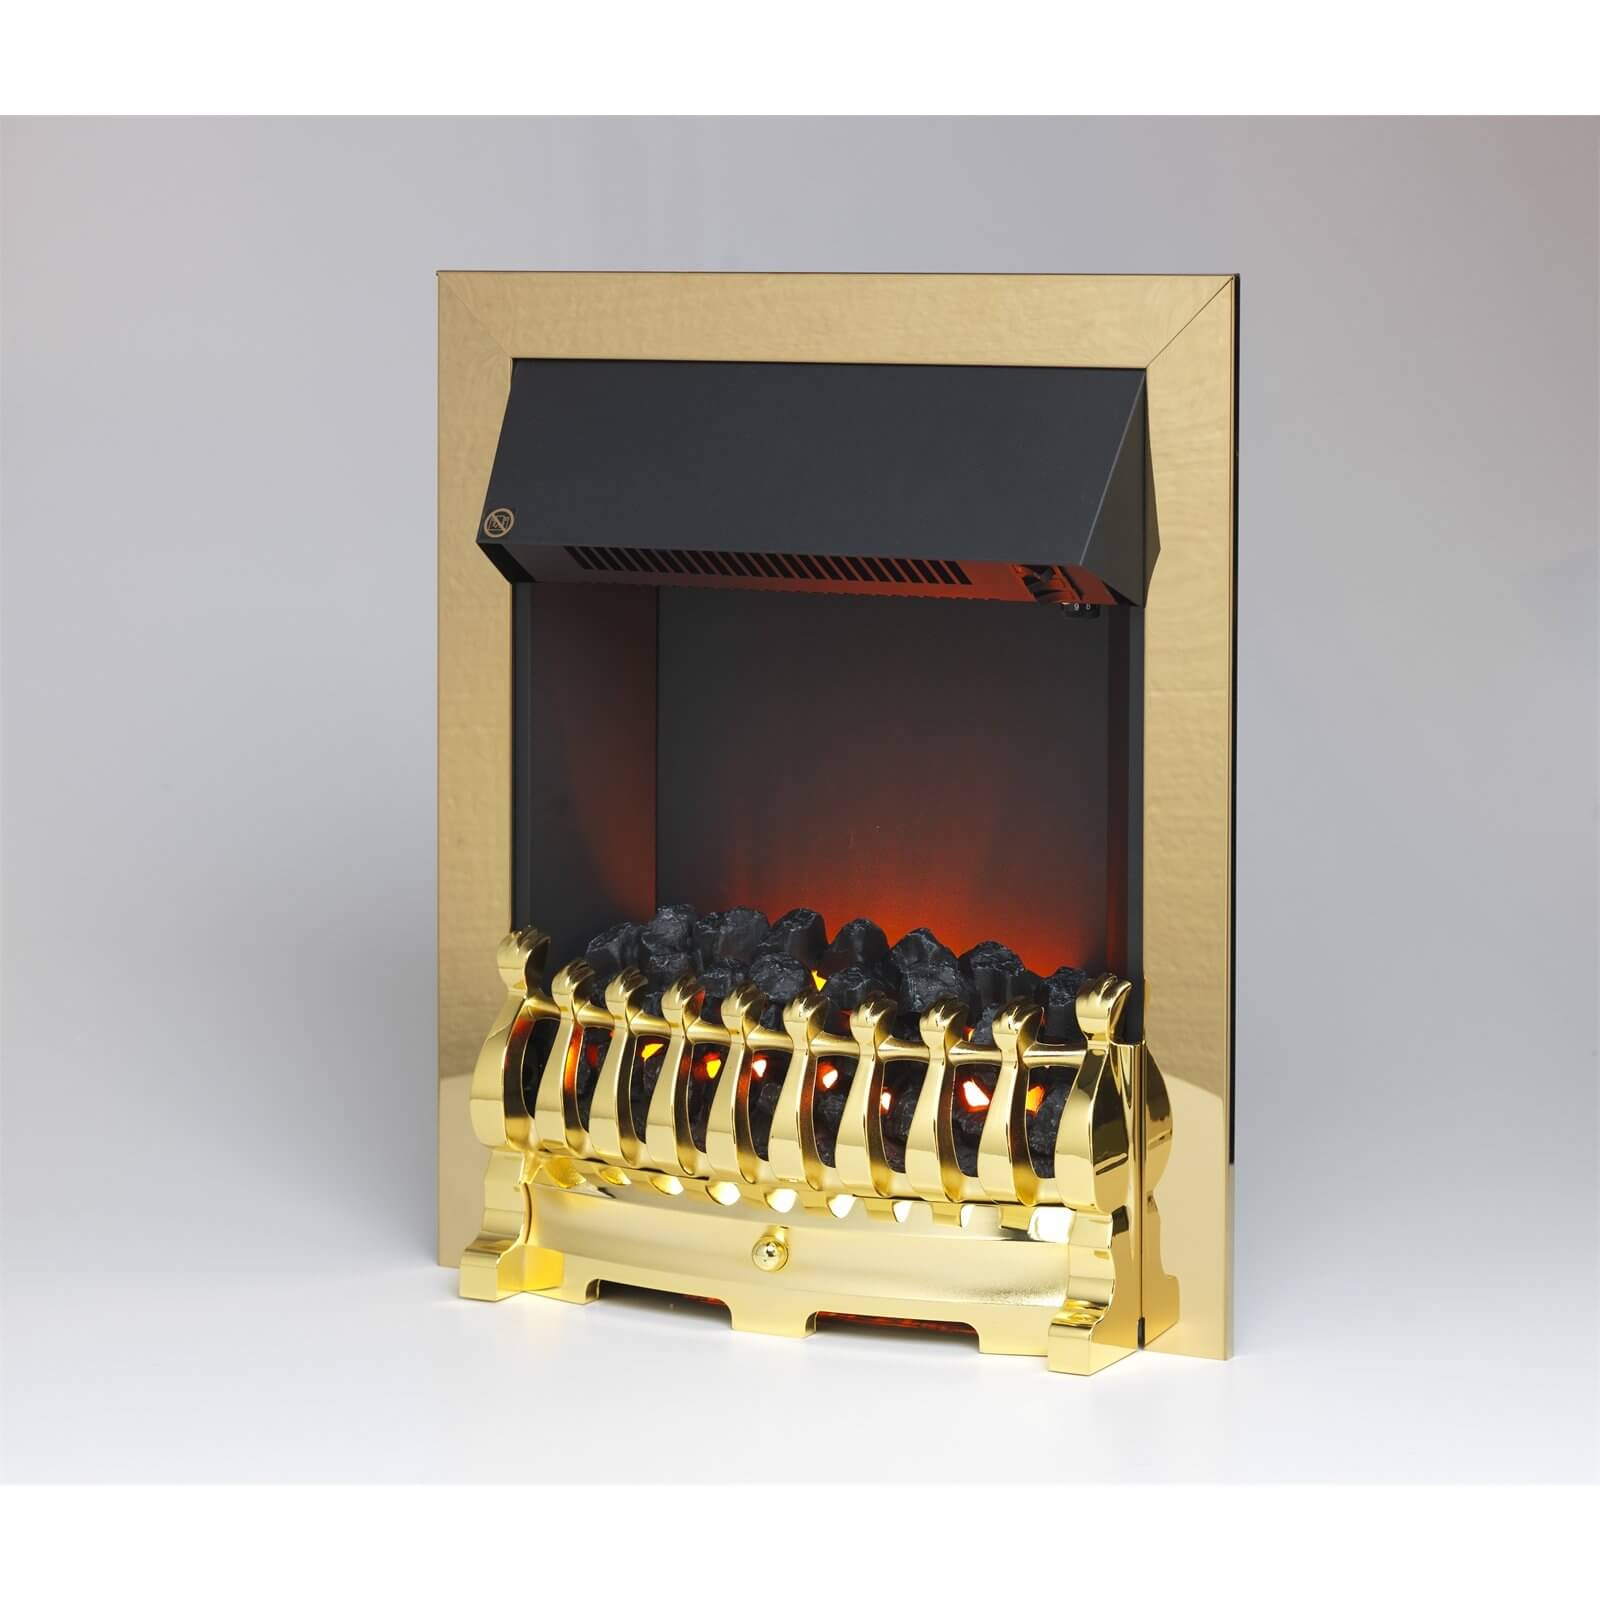 Suncrest Howden Electric Fire Suite with Flat to Wall Fitting - Oak & Brass